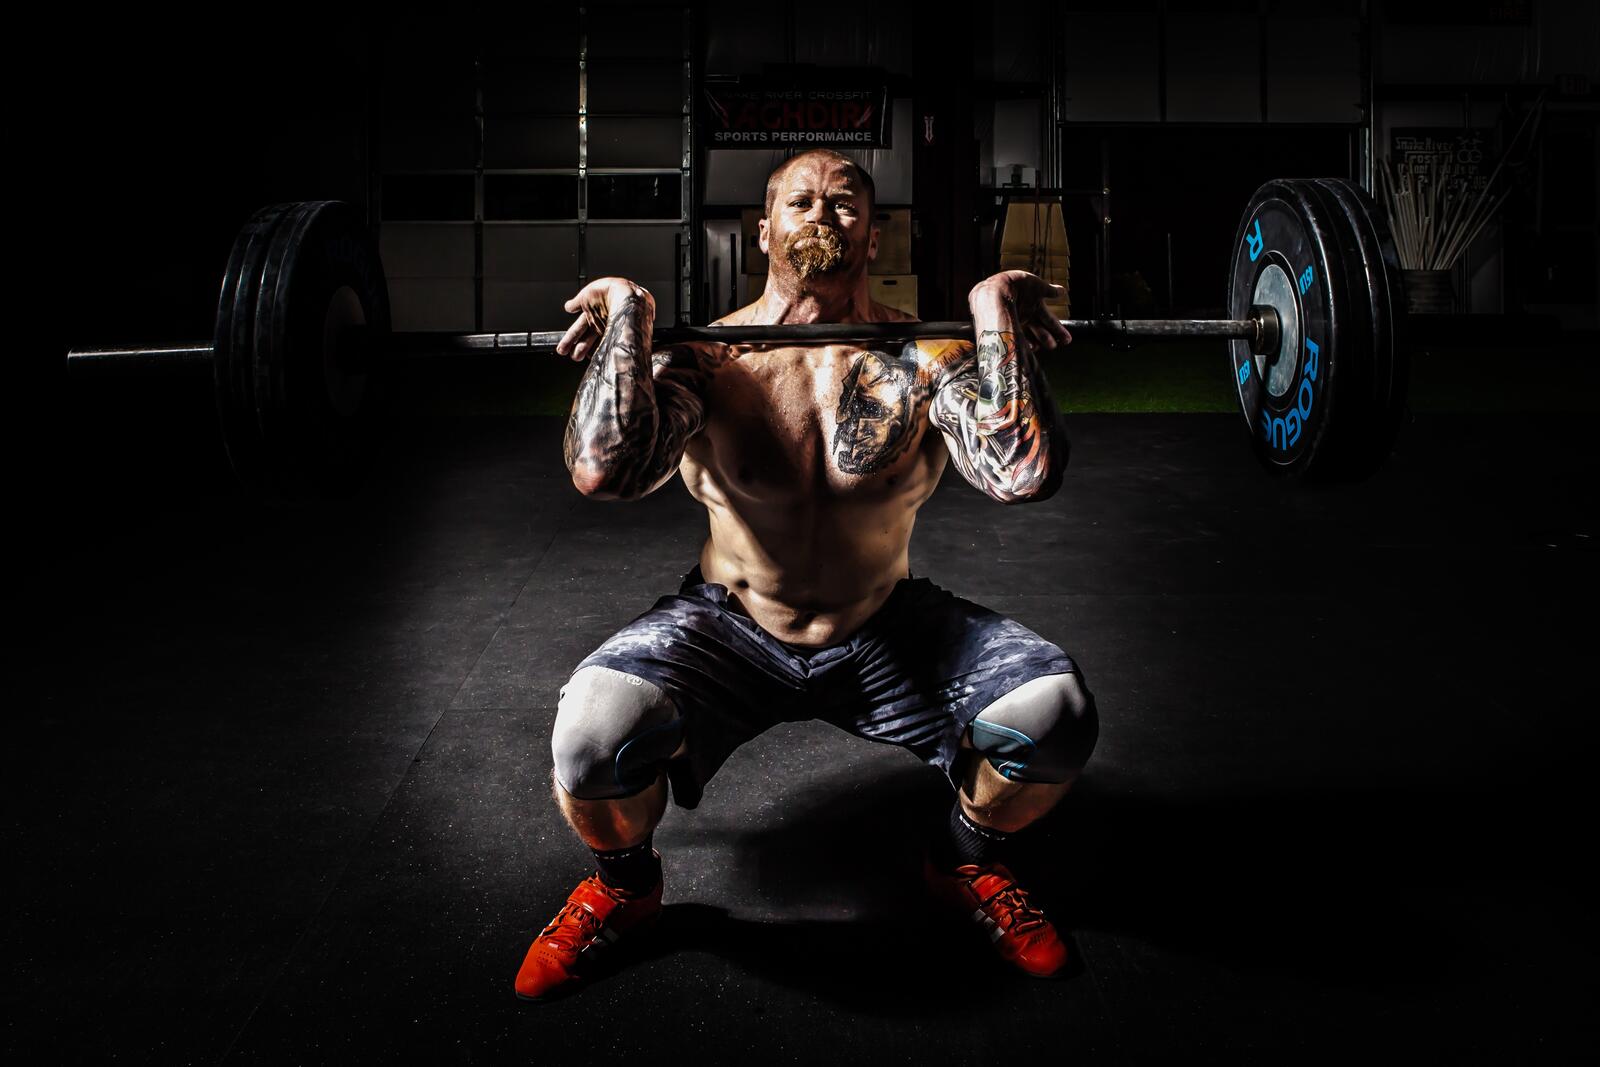 Free photo A bodybuilder lifts a barbell